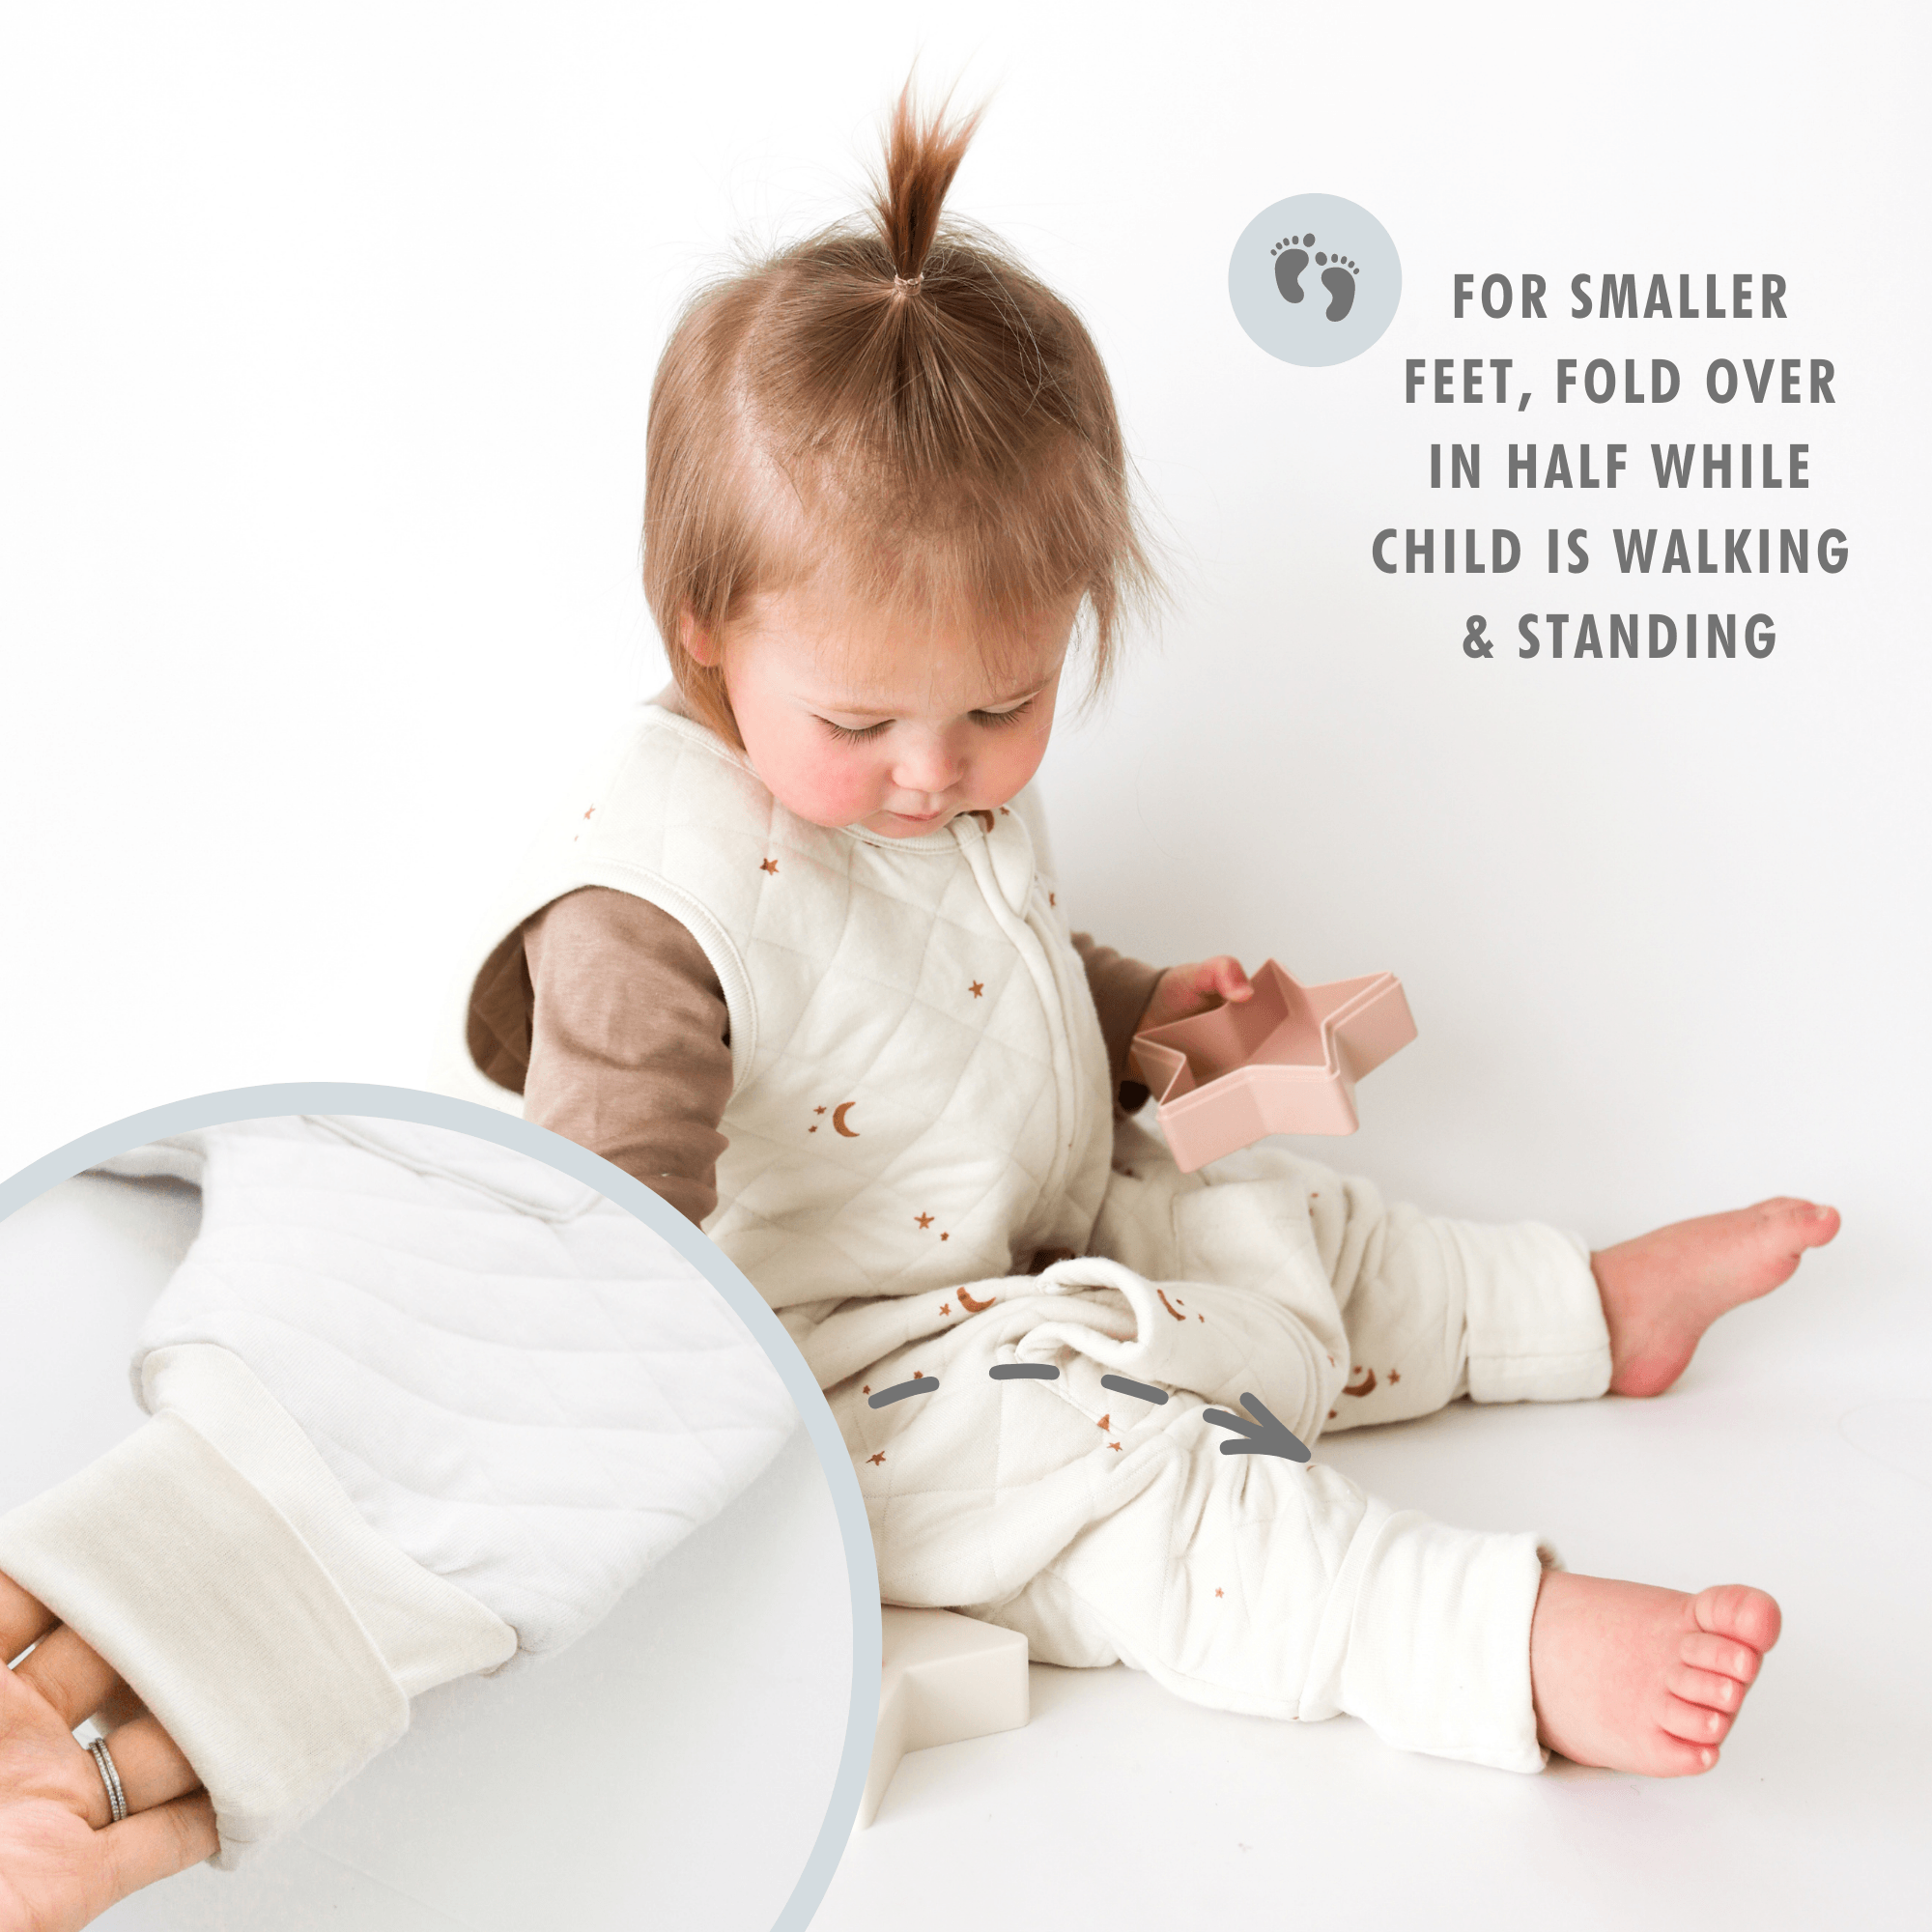 Tealbee Moon & Stars Wearable Blanket - for smaller feet, fold over in half while child is walking and standing.